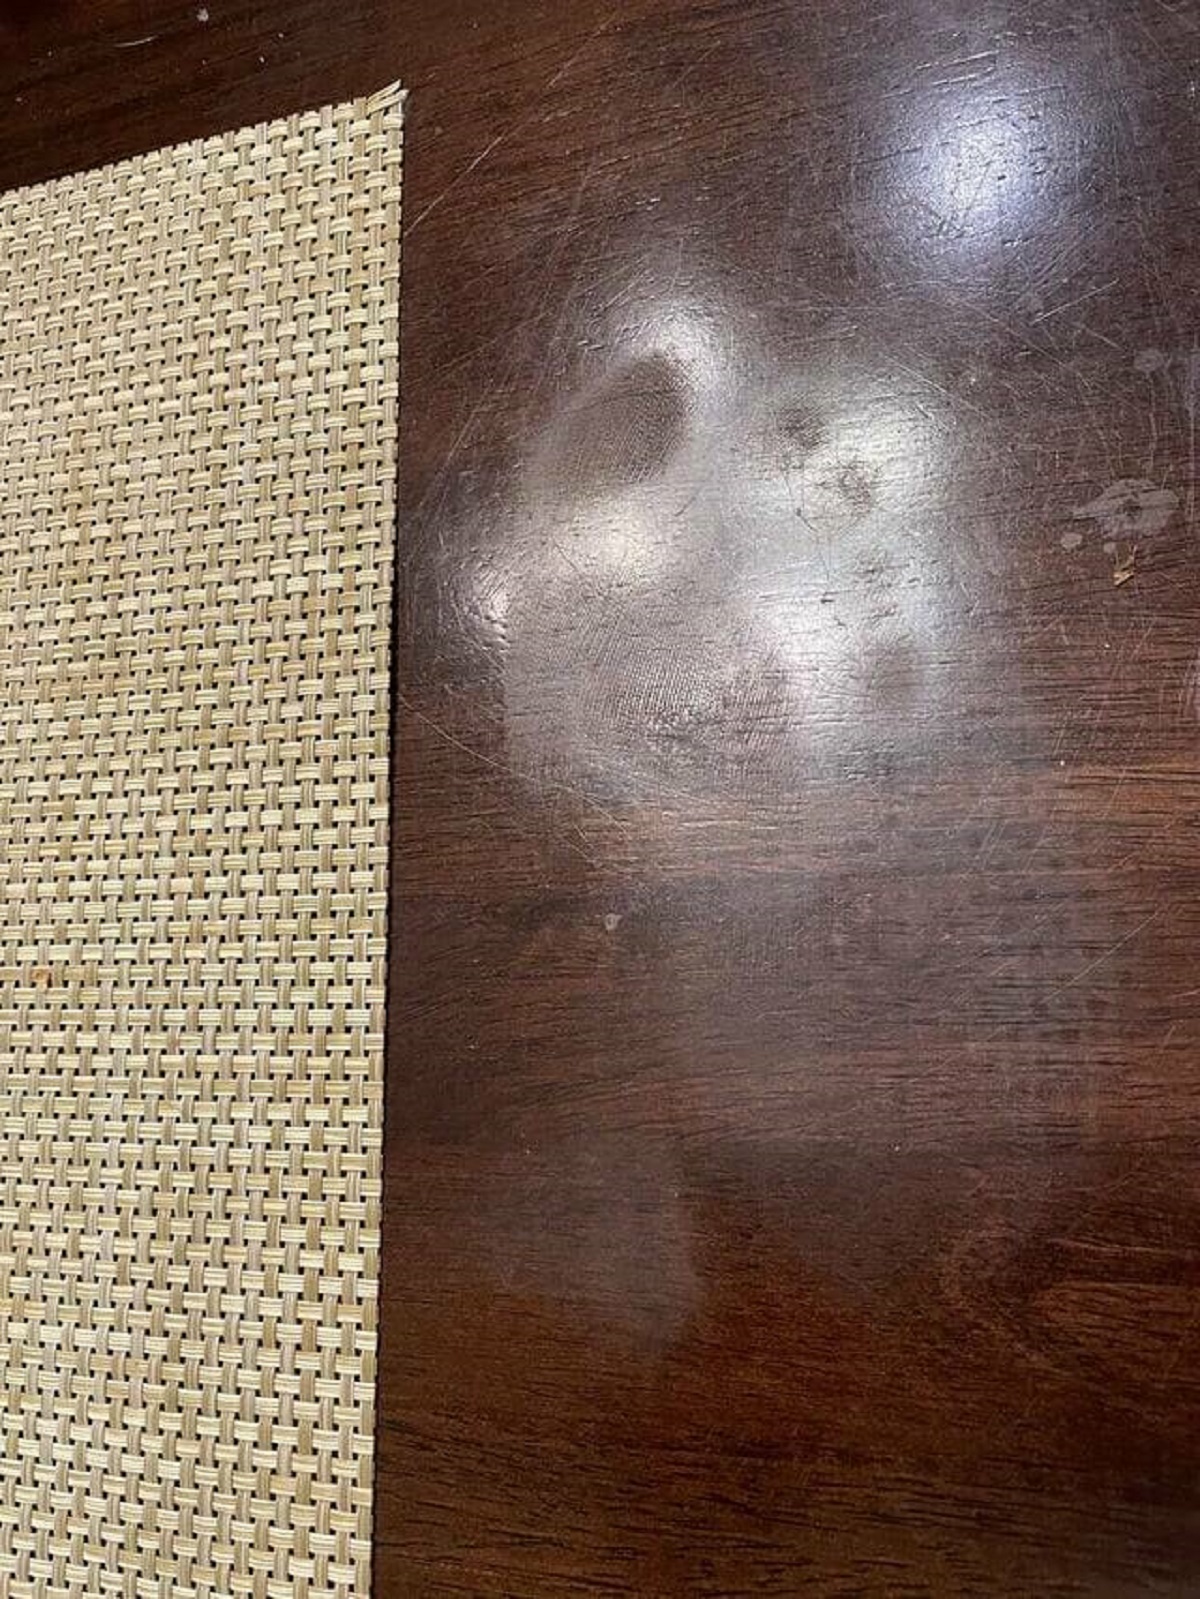 "There’s a bare footprint on the table of this restaurant I went to for brunch"